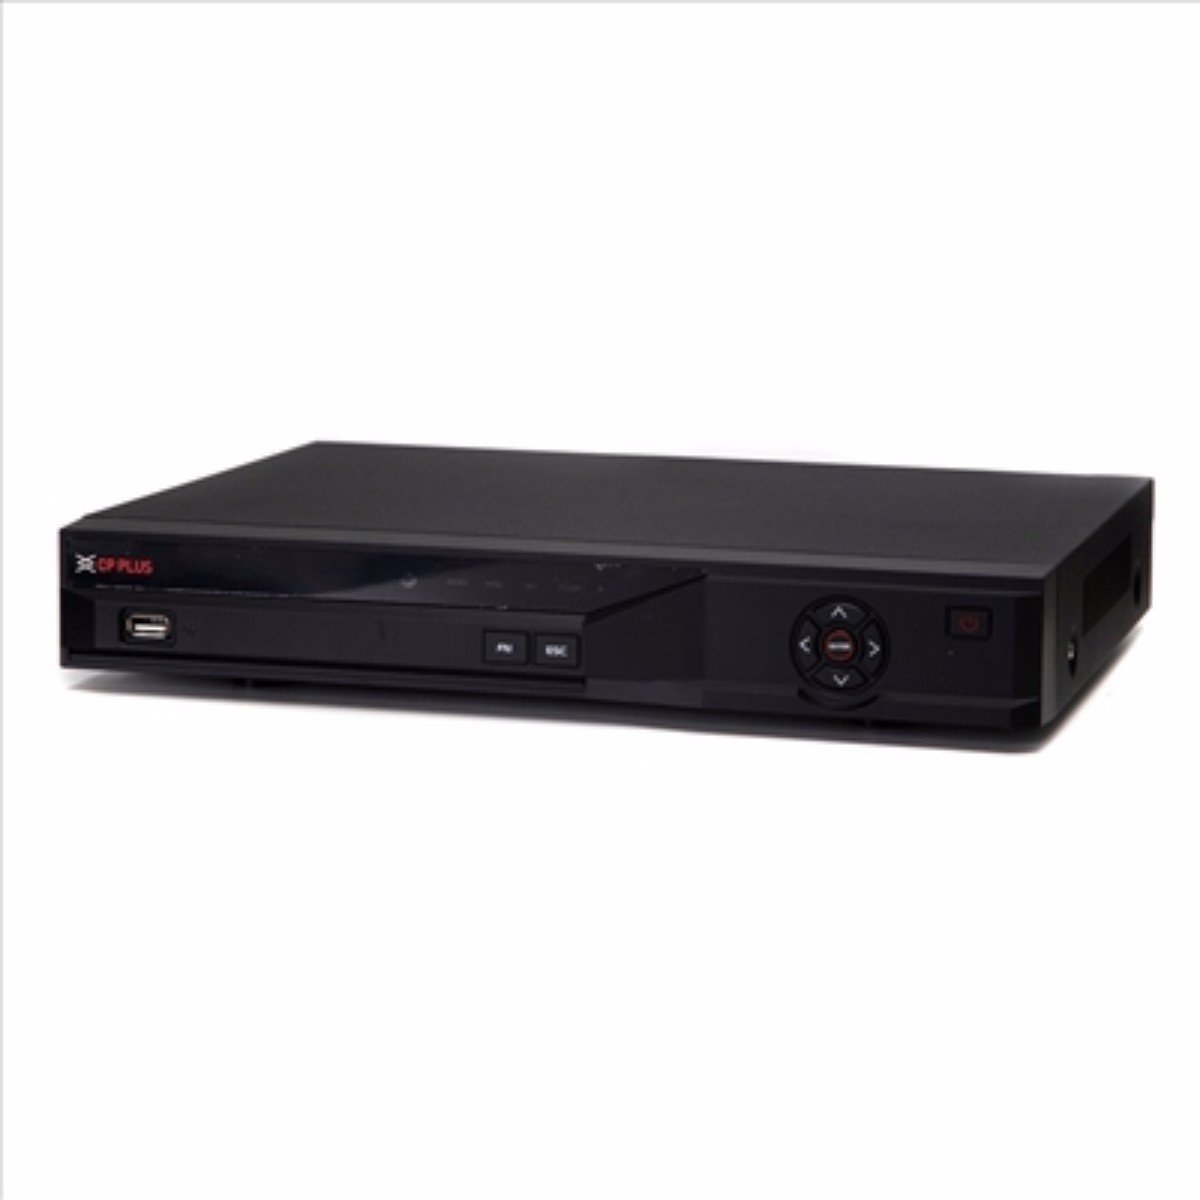 CP Plus CP-UVR-0404E1-S (without Harddisk) 4 Channel DVR (Black)